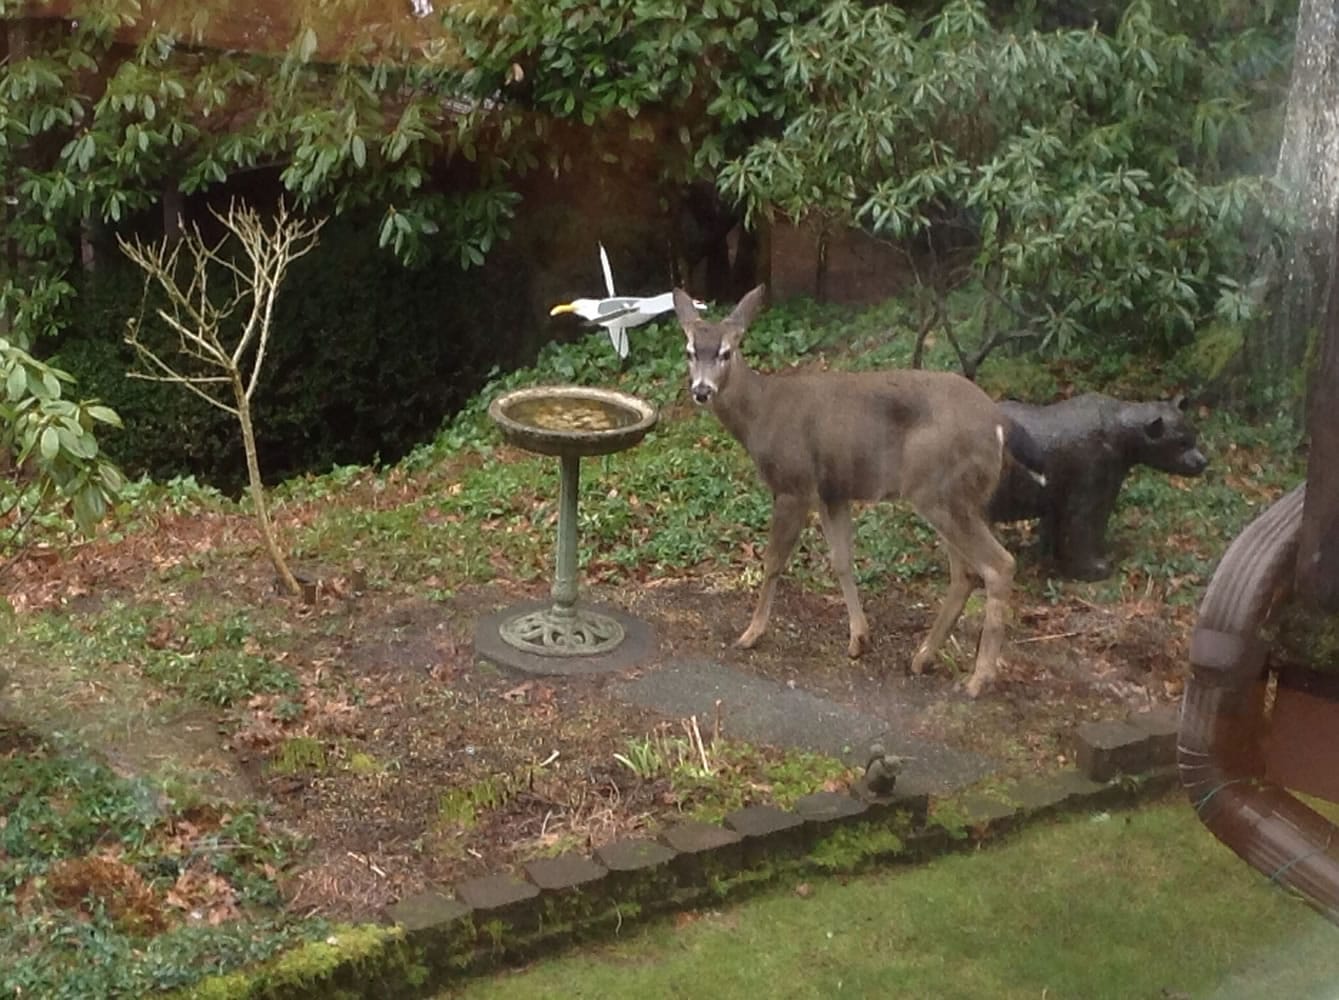 Water for our visiting deer in our backyard garden in the City
of Camas.